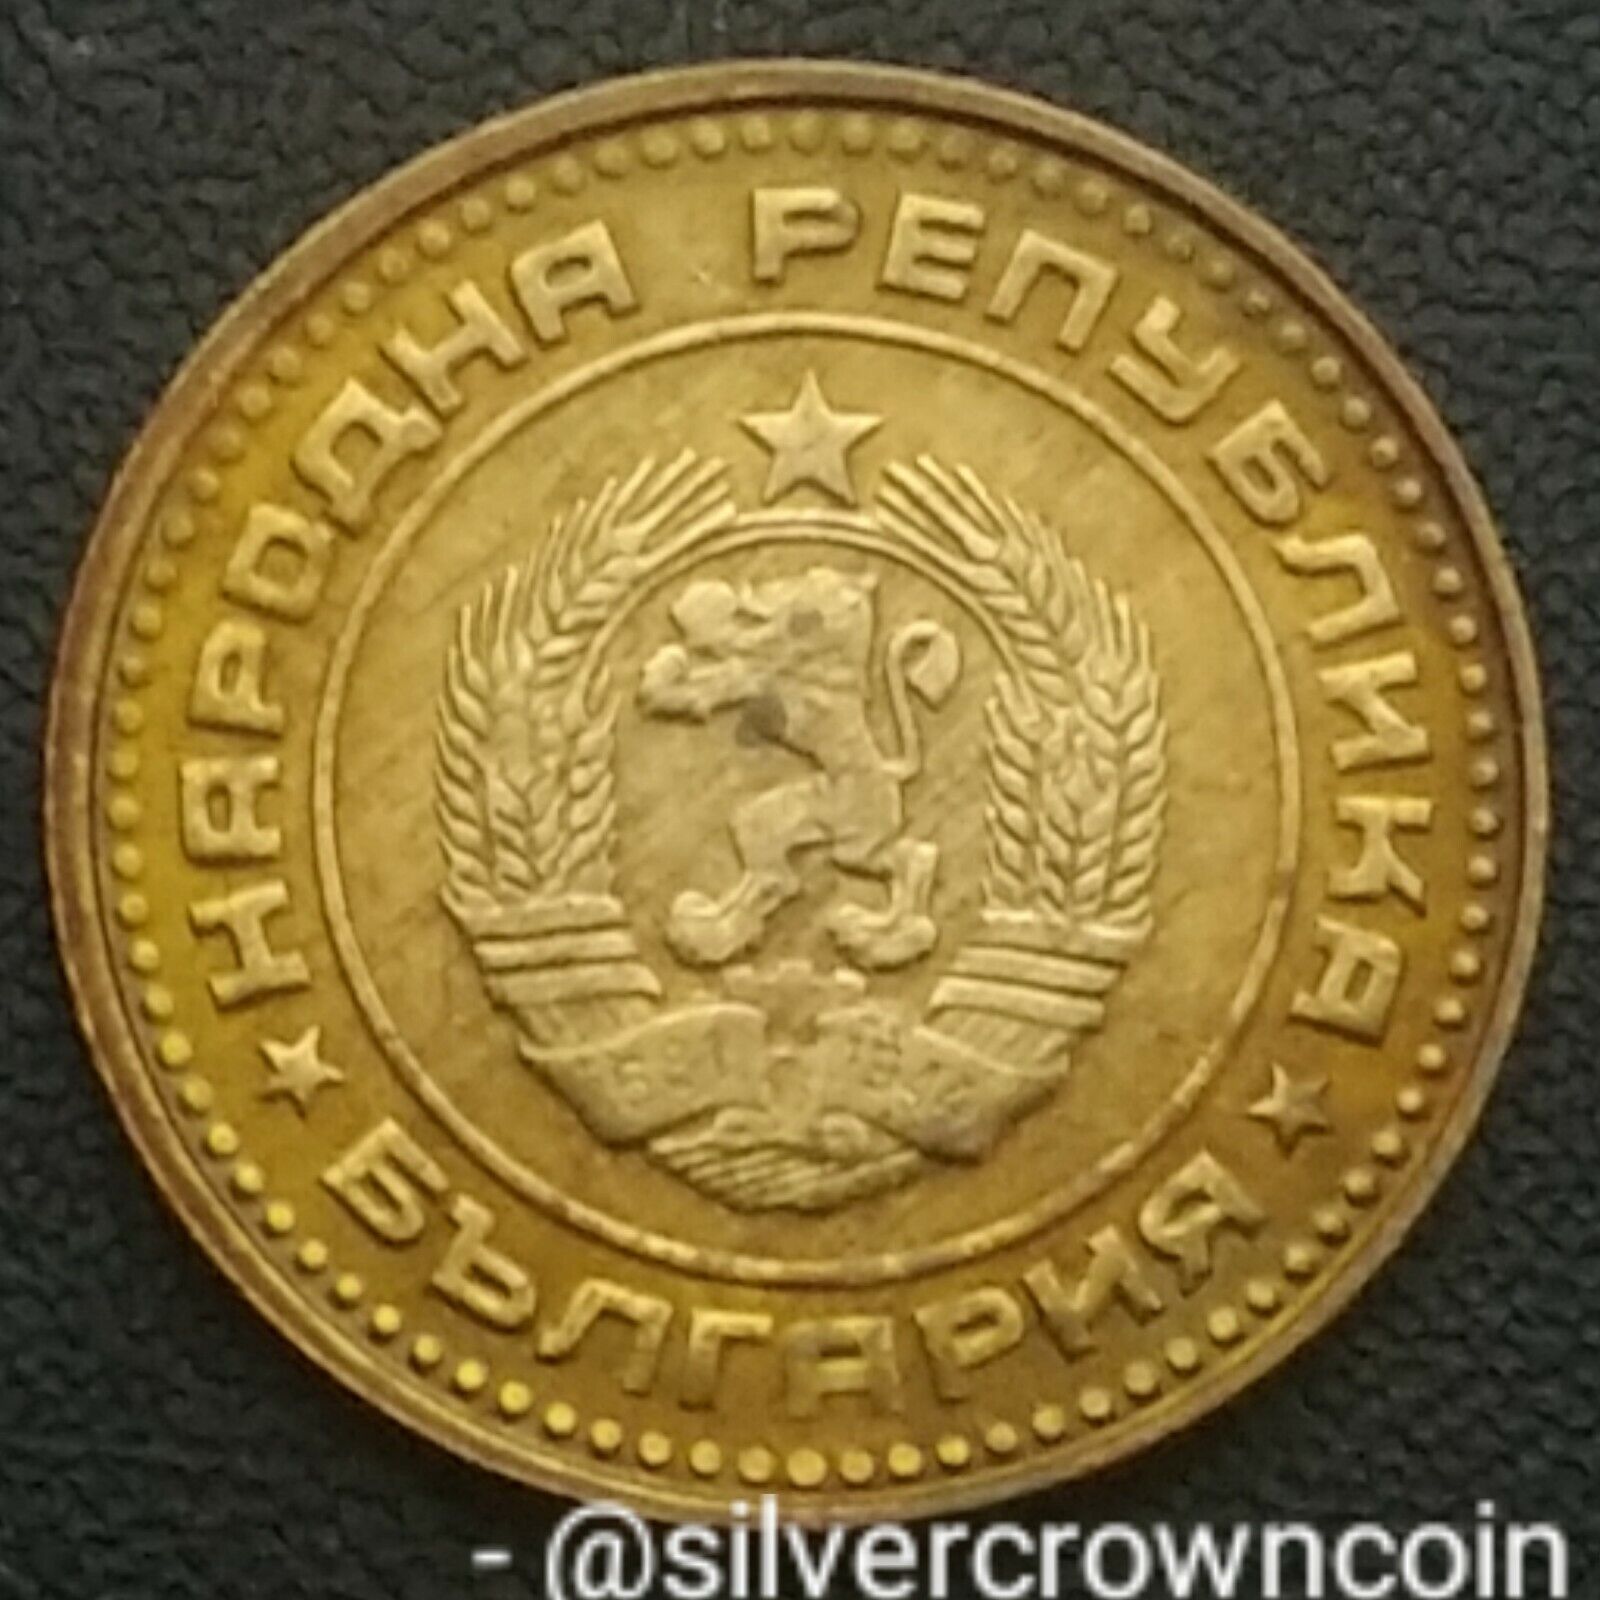 Bulgaria 1 Stotinka 1974. Km#84. One Cent Coin. First Year Issue 1974-1990.